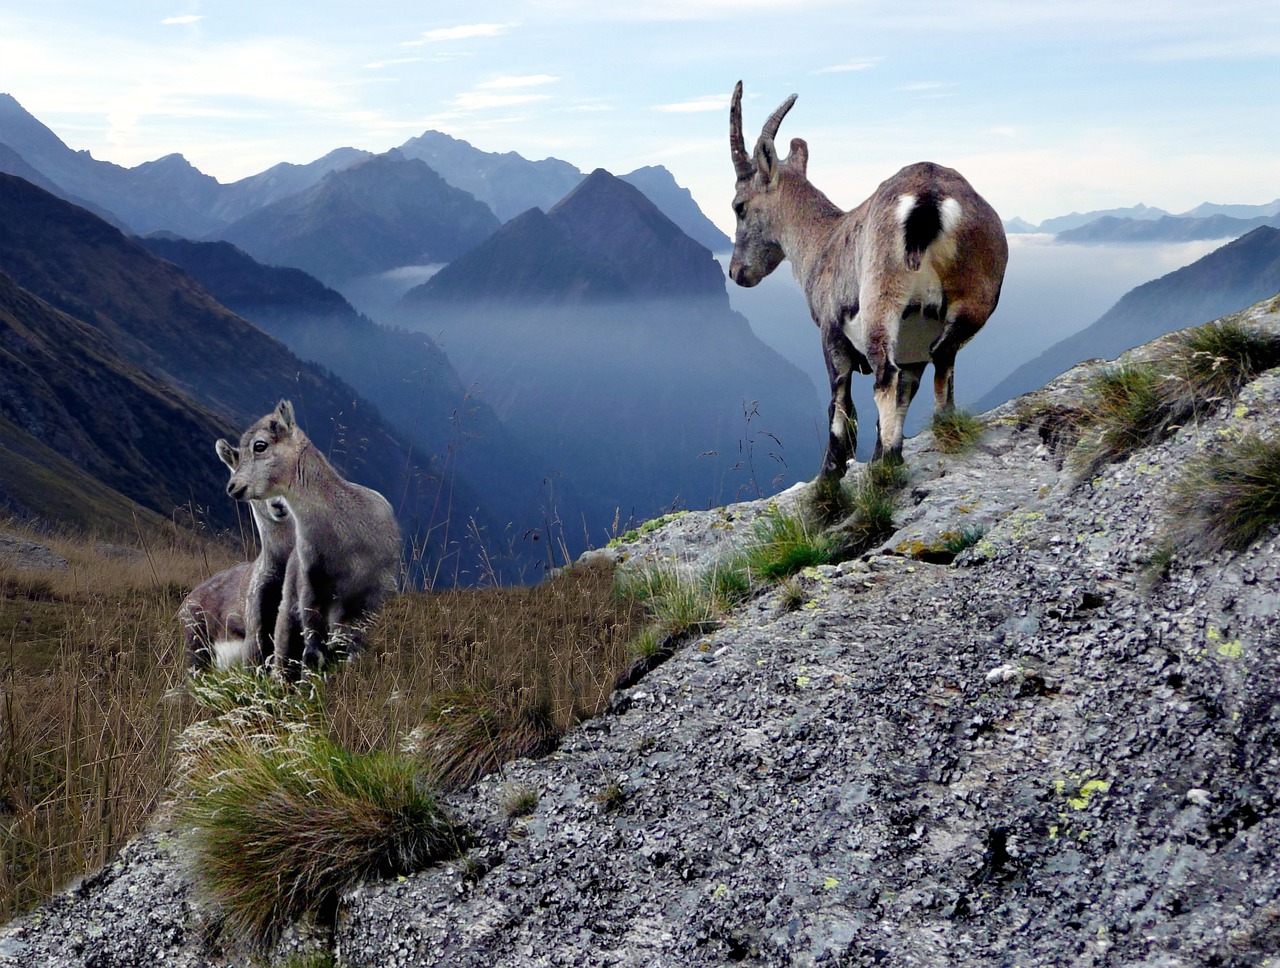 Image - chamois with young animals